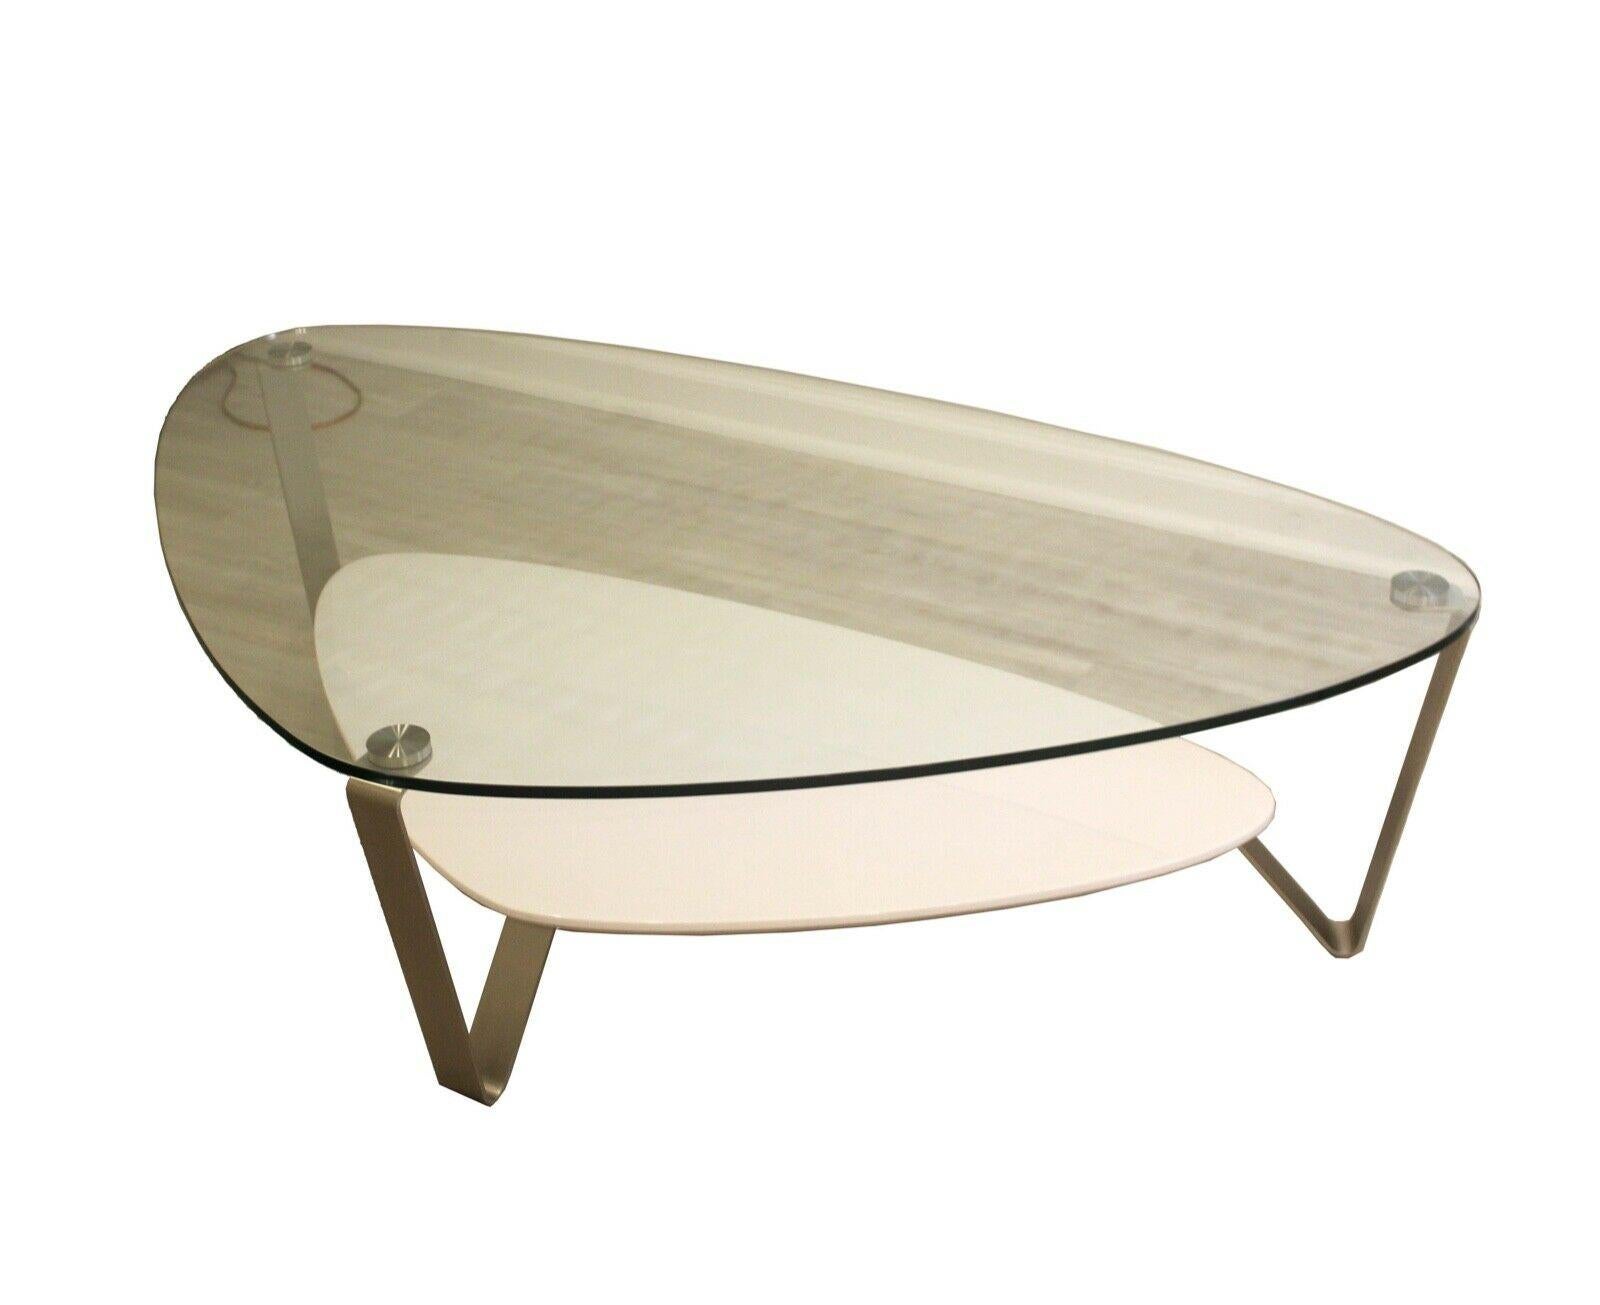 3 Legged contemporary coffee table with gloss white bottom shelf and glass top with polished metal legs. In excellent condition. Dimensions: 54.5 W X 33.25 D X 15.25 H.
 